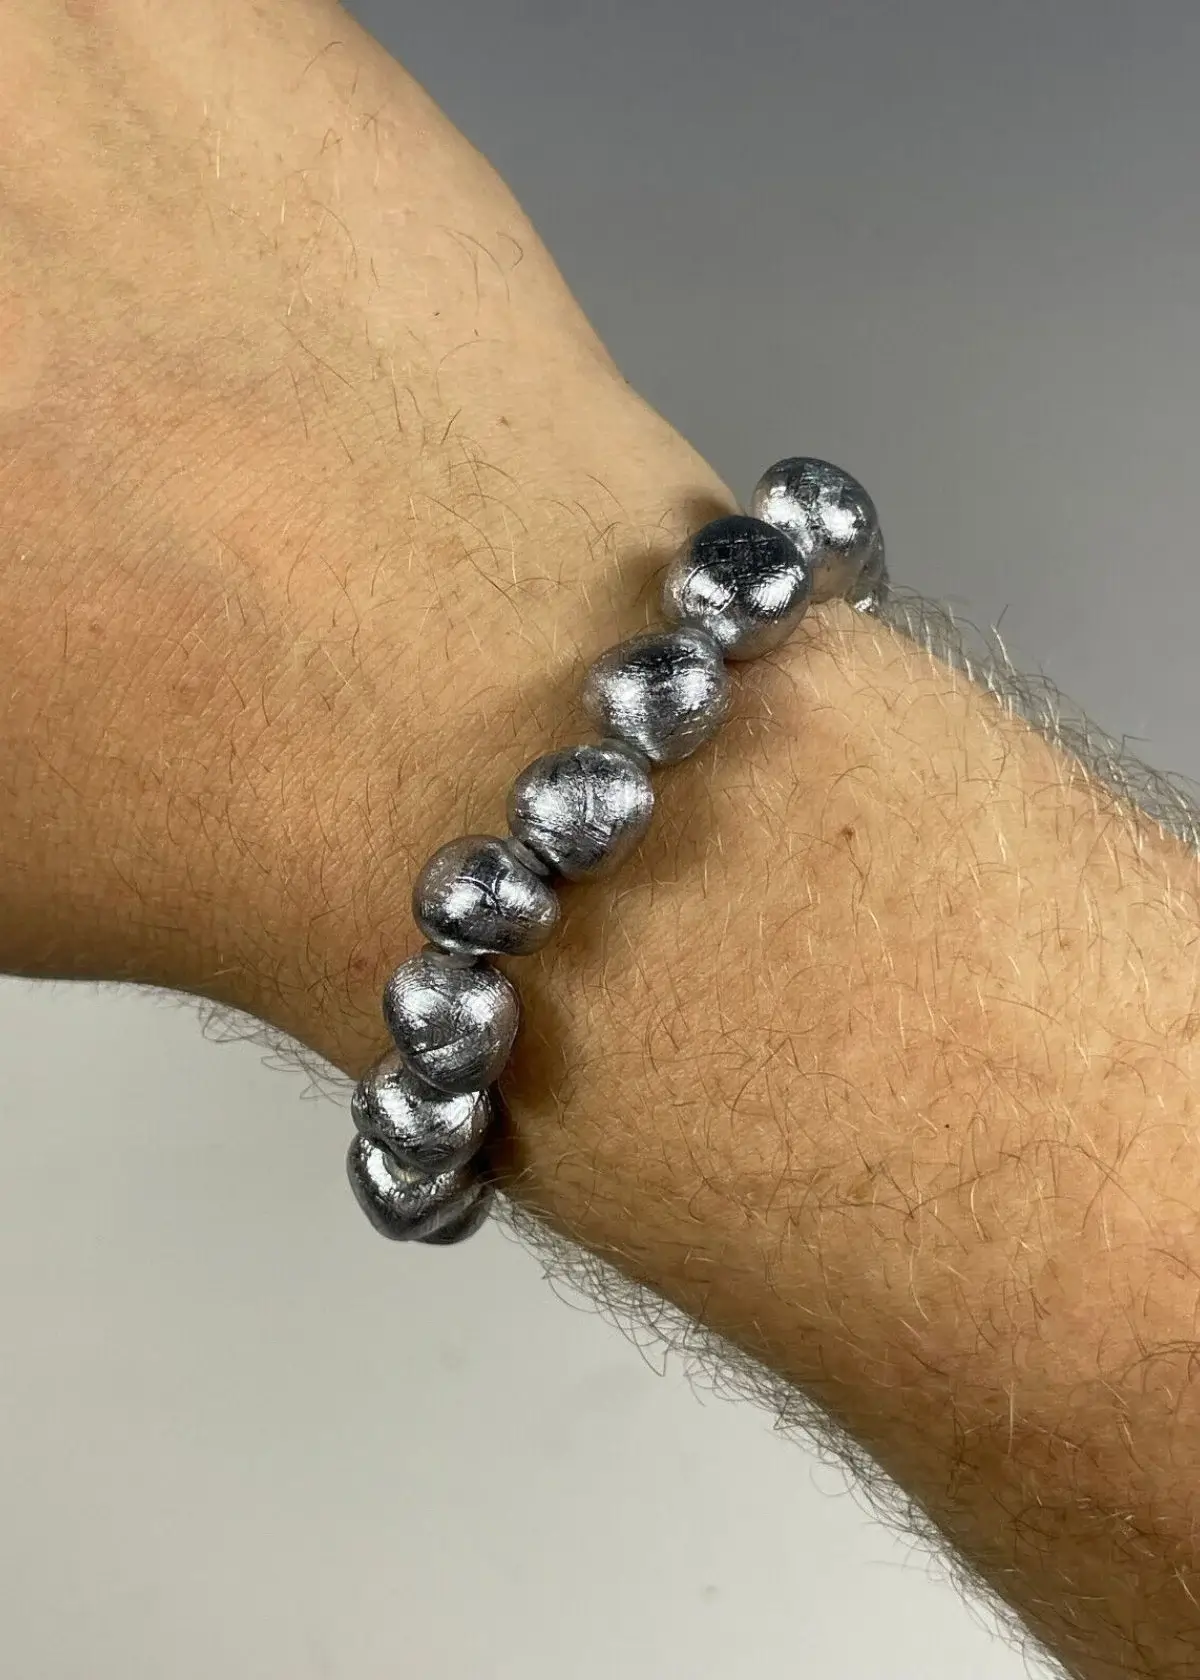 What are the Benefits of wearing a Meteorite Bracelet?